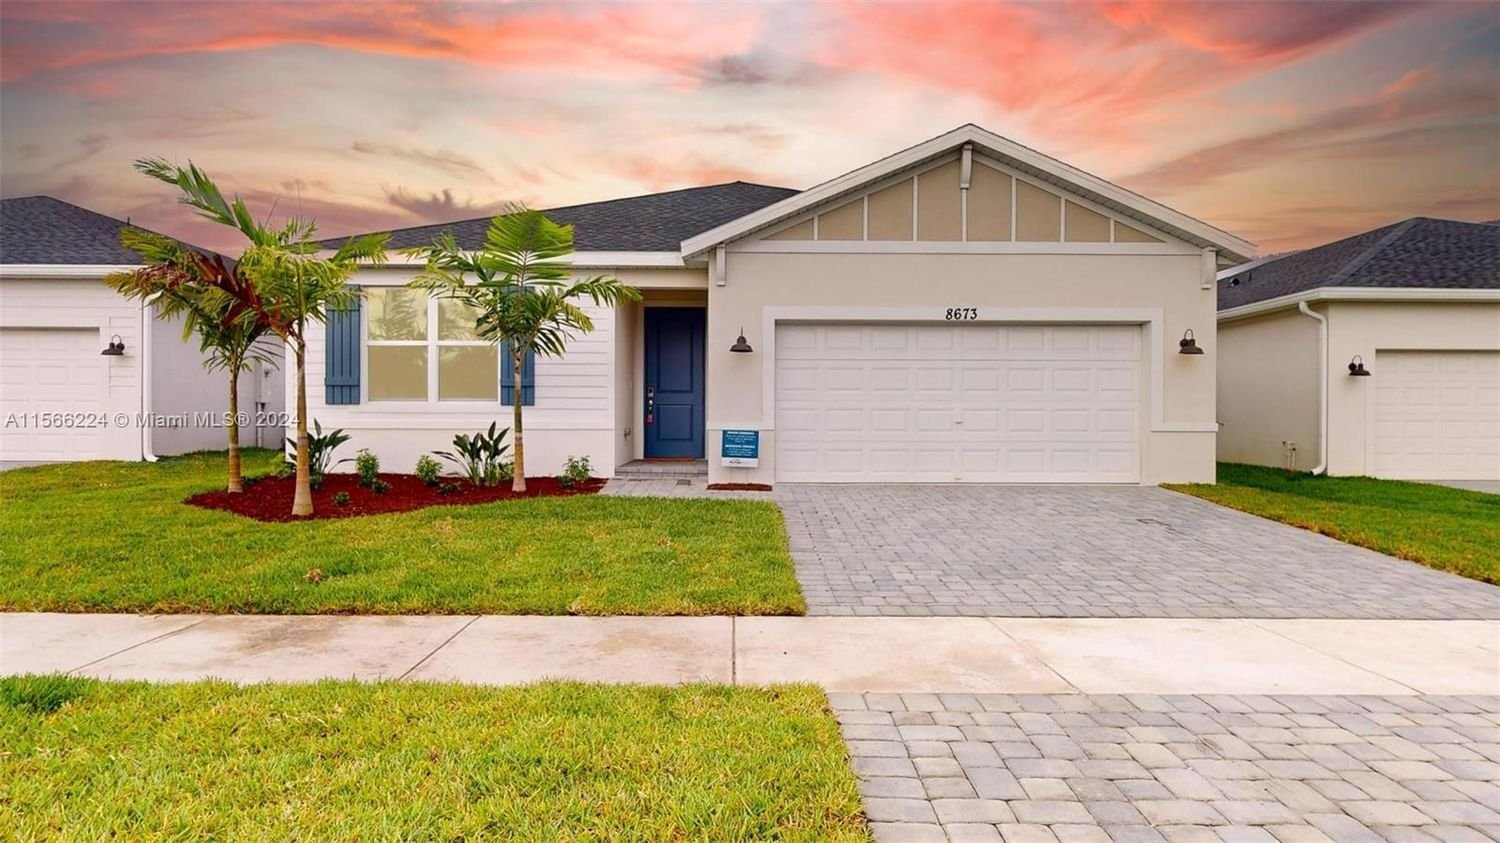 Real estate property located at 8673 Dahlia Cir, St Lucie County, AZALEA, Port St. Lucie, FL